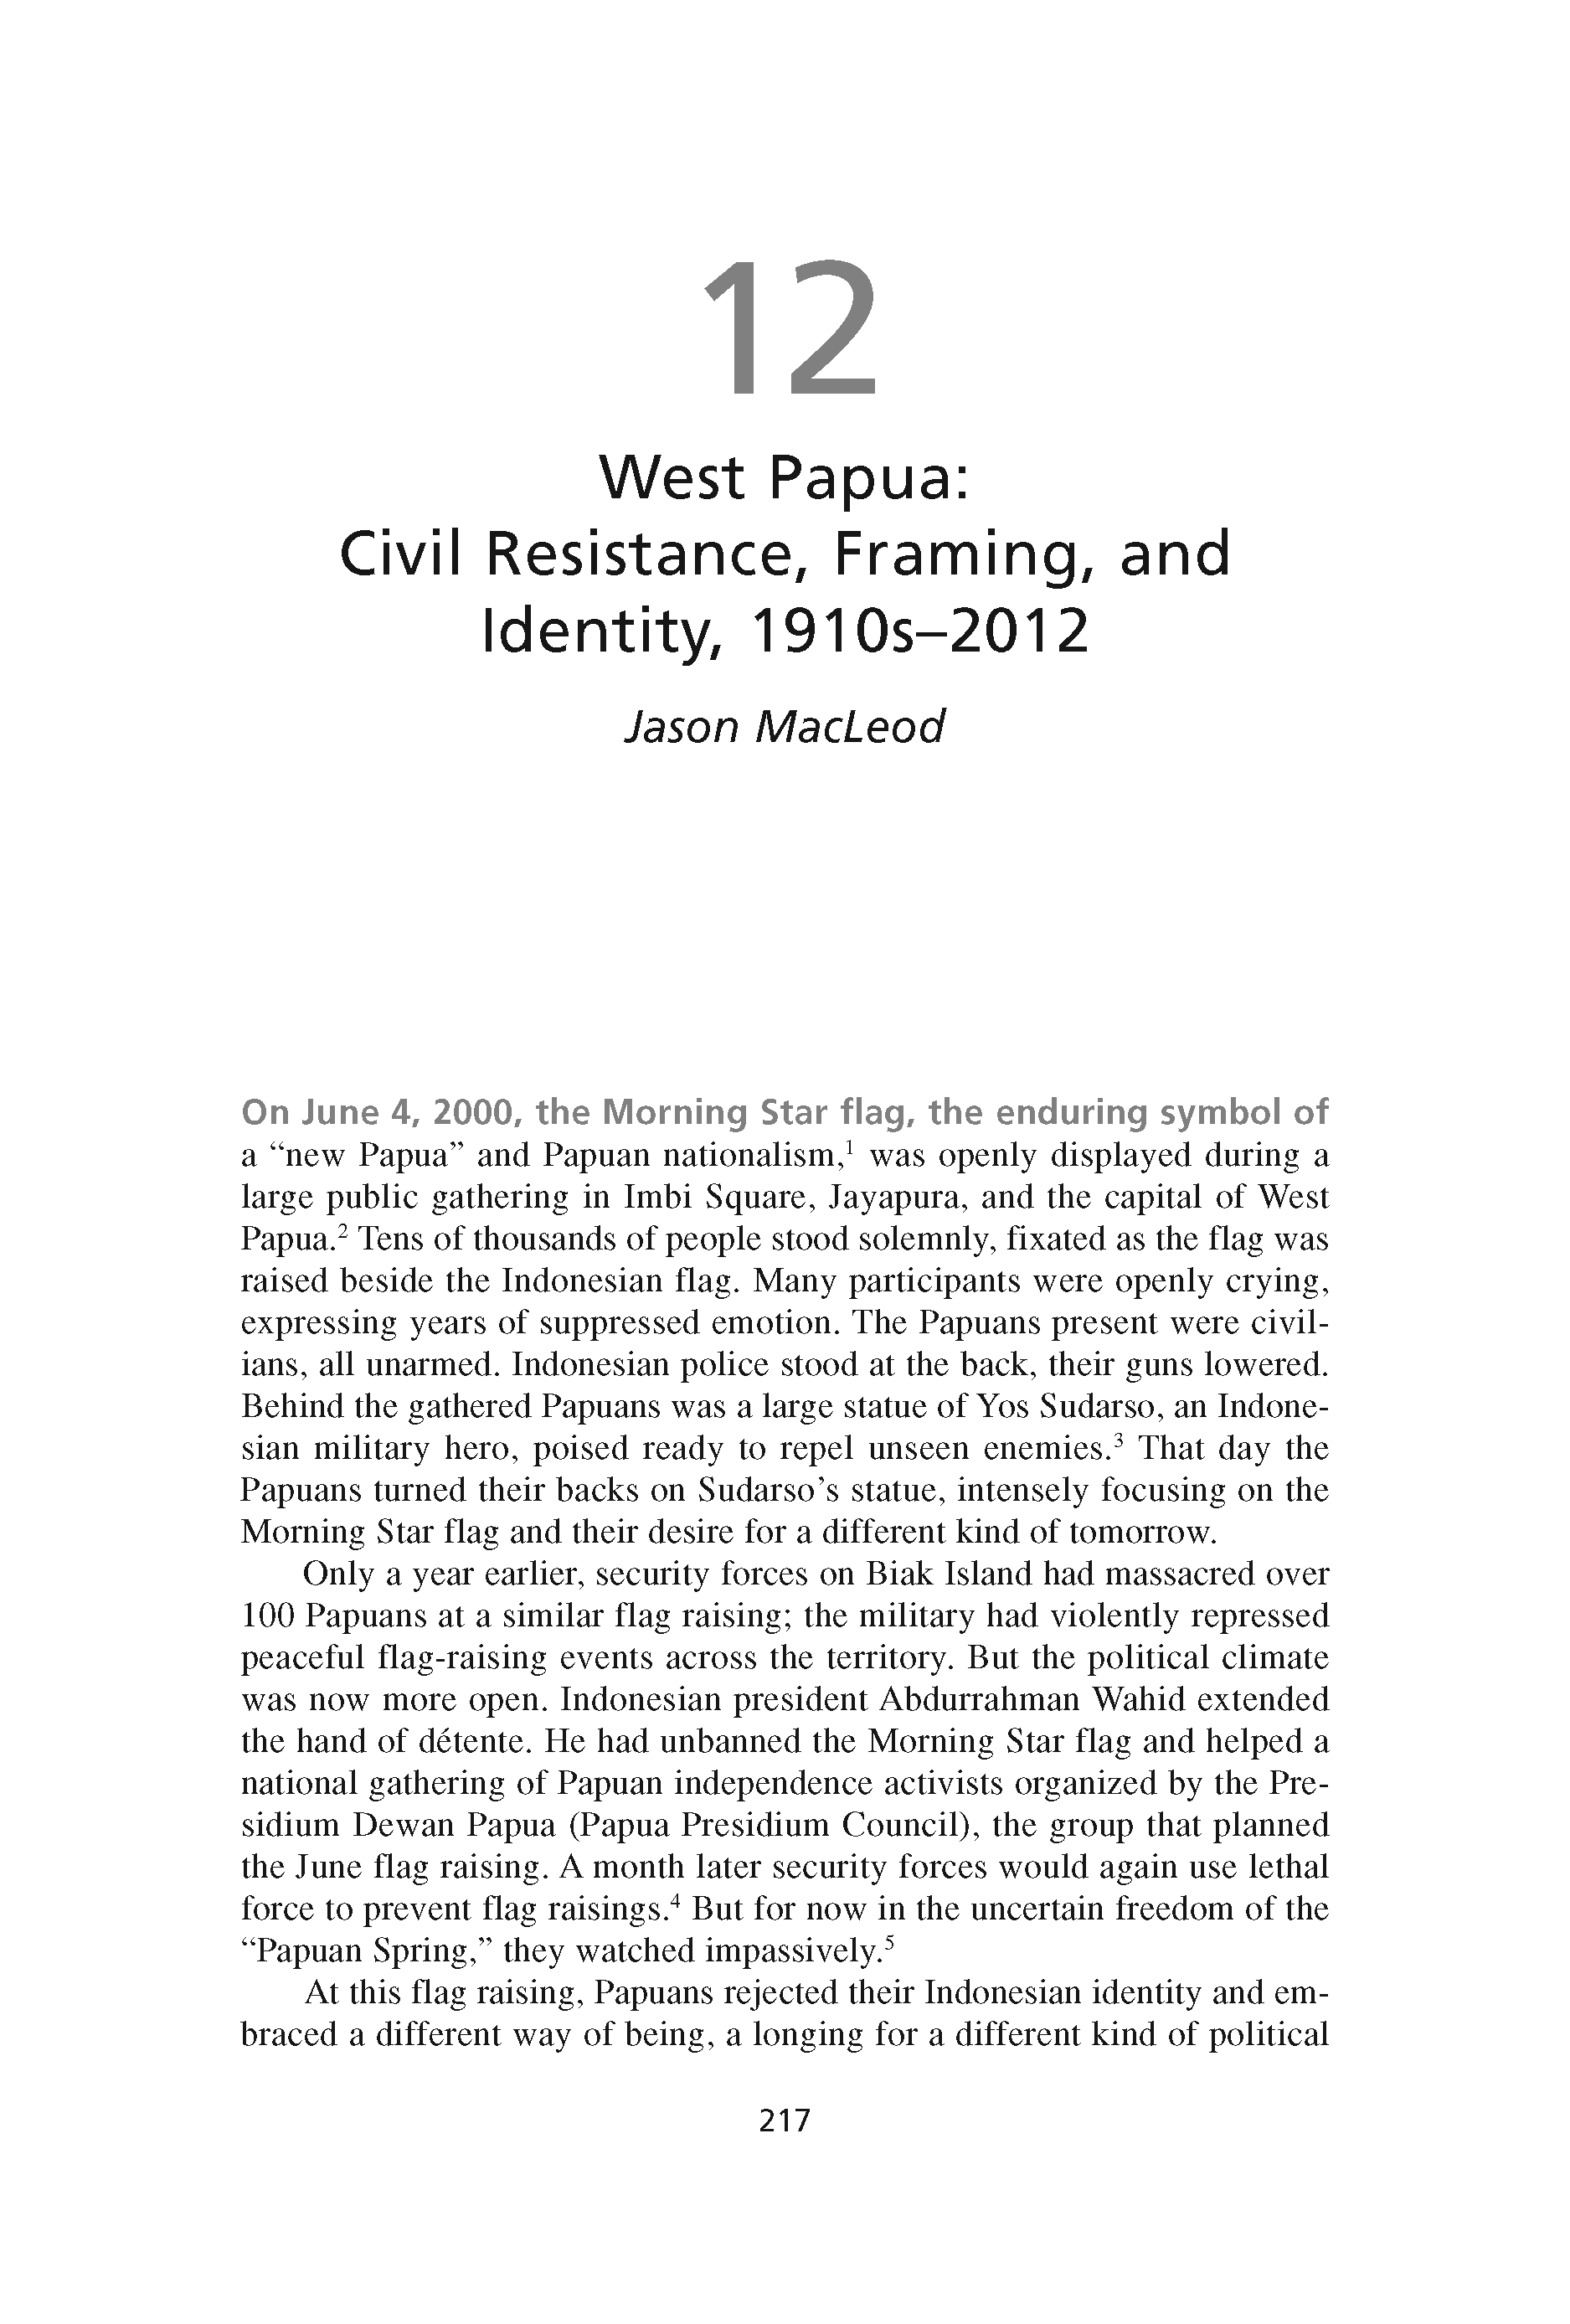 West Papua: Civil Resistance, Framing, and Identity, 1910s-2012 (Chapter 12 from ‘Recovering Nonviolent History’)